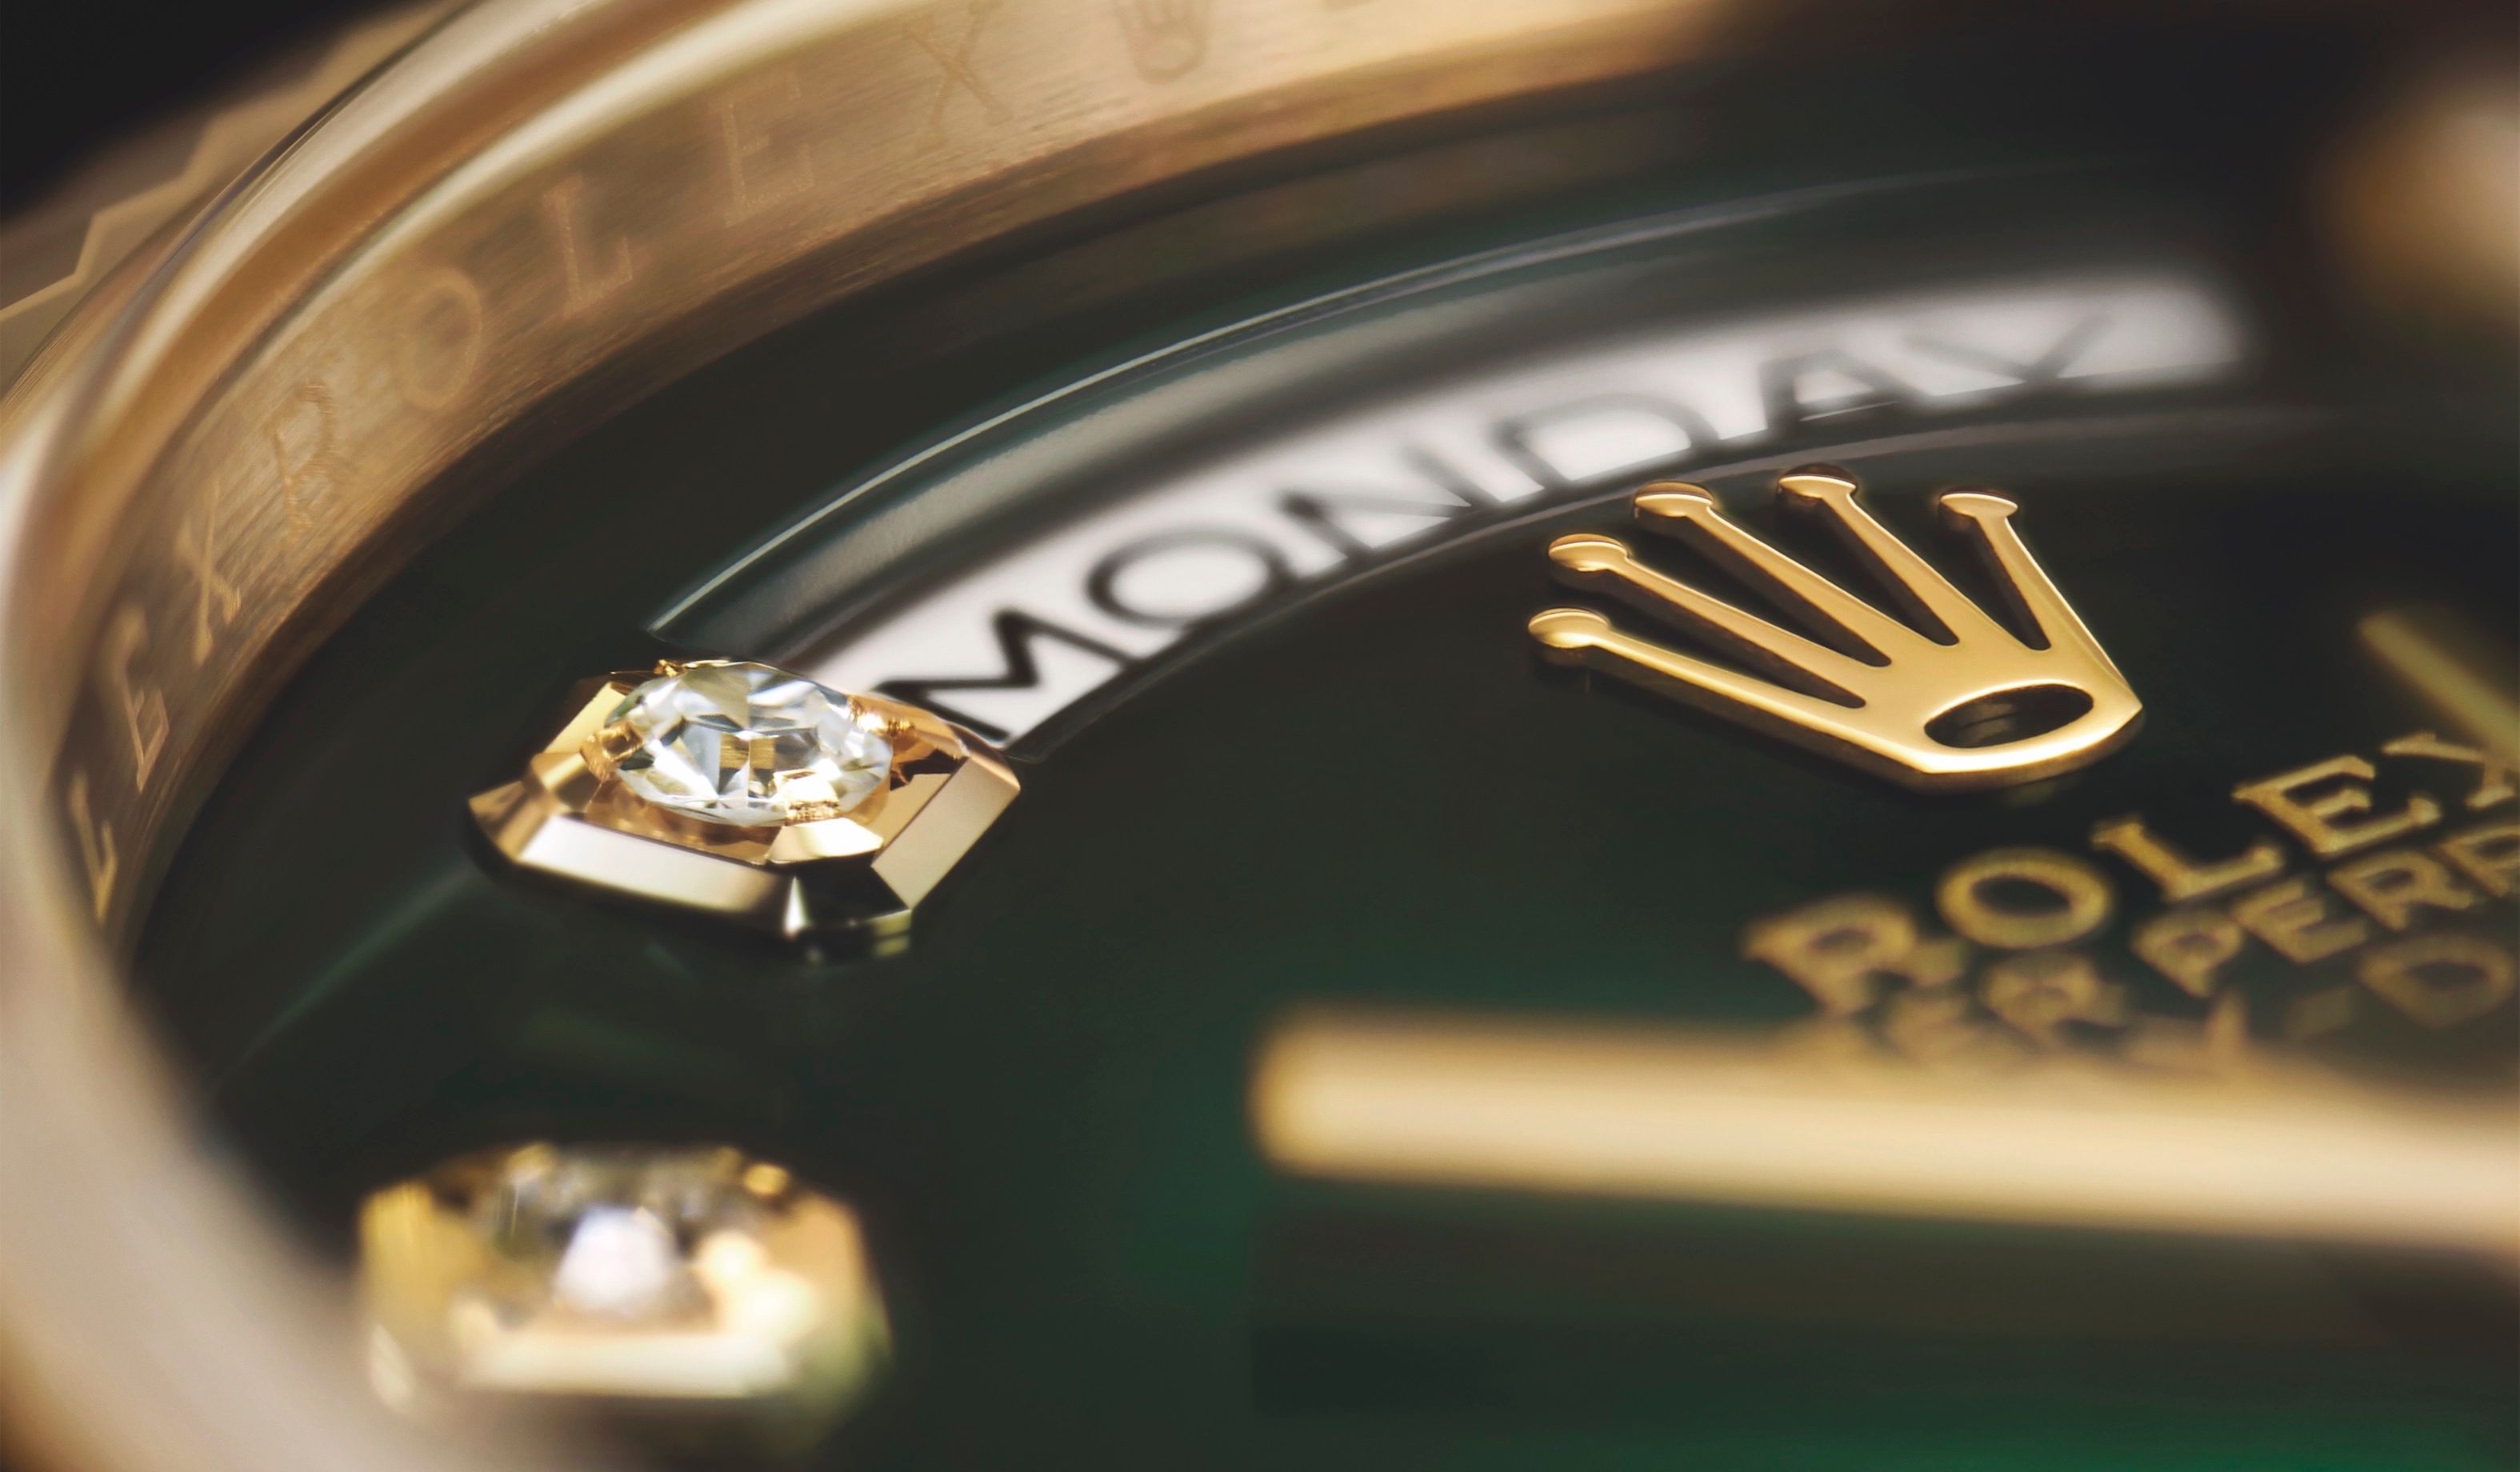 The Rolex Oyster Perpetual Day-Date 36 gets a bold update